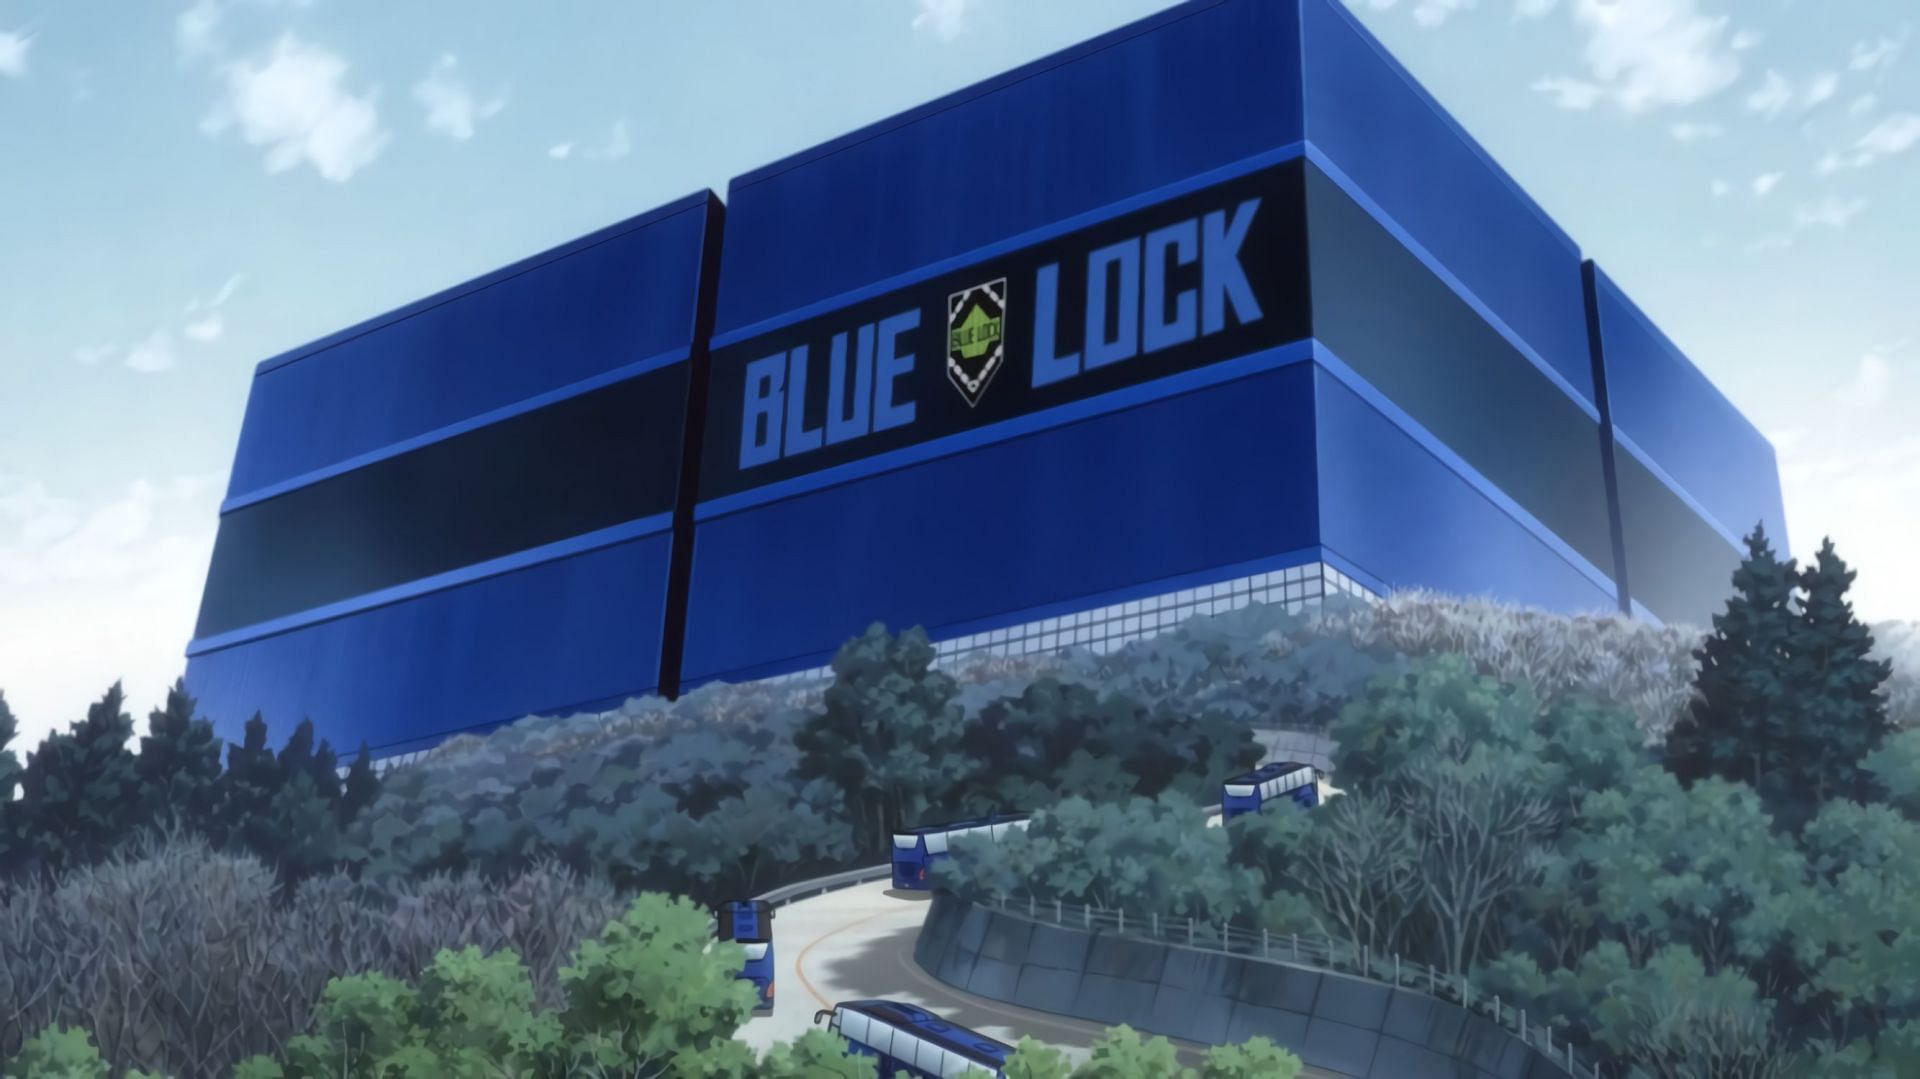 Bluelock episode 1: The search for the world's biggest egoist and an  intense game of tag